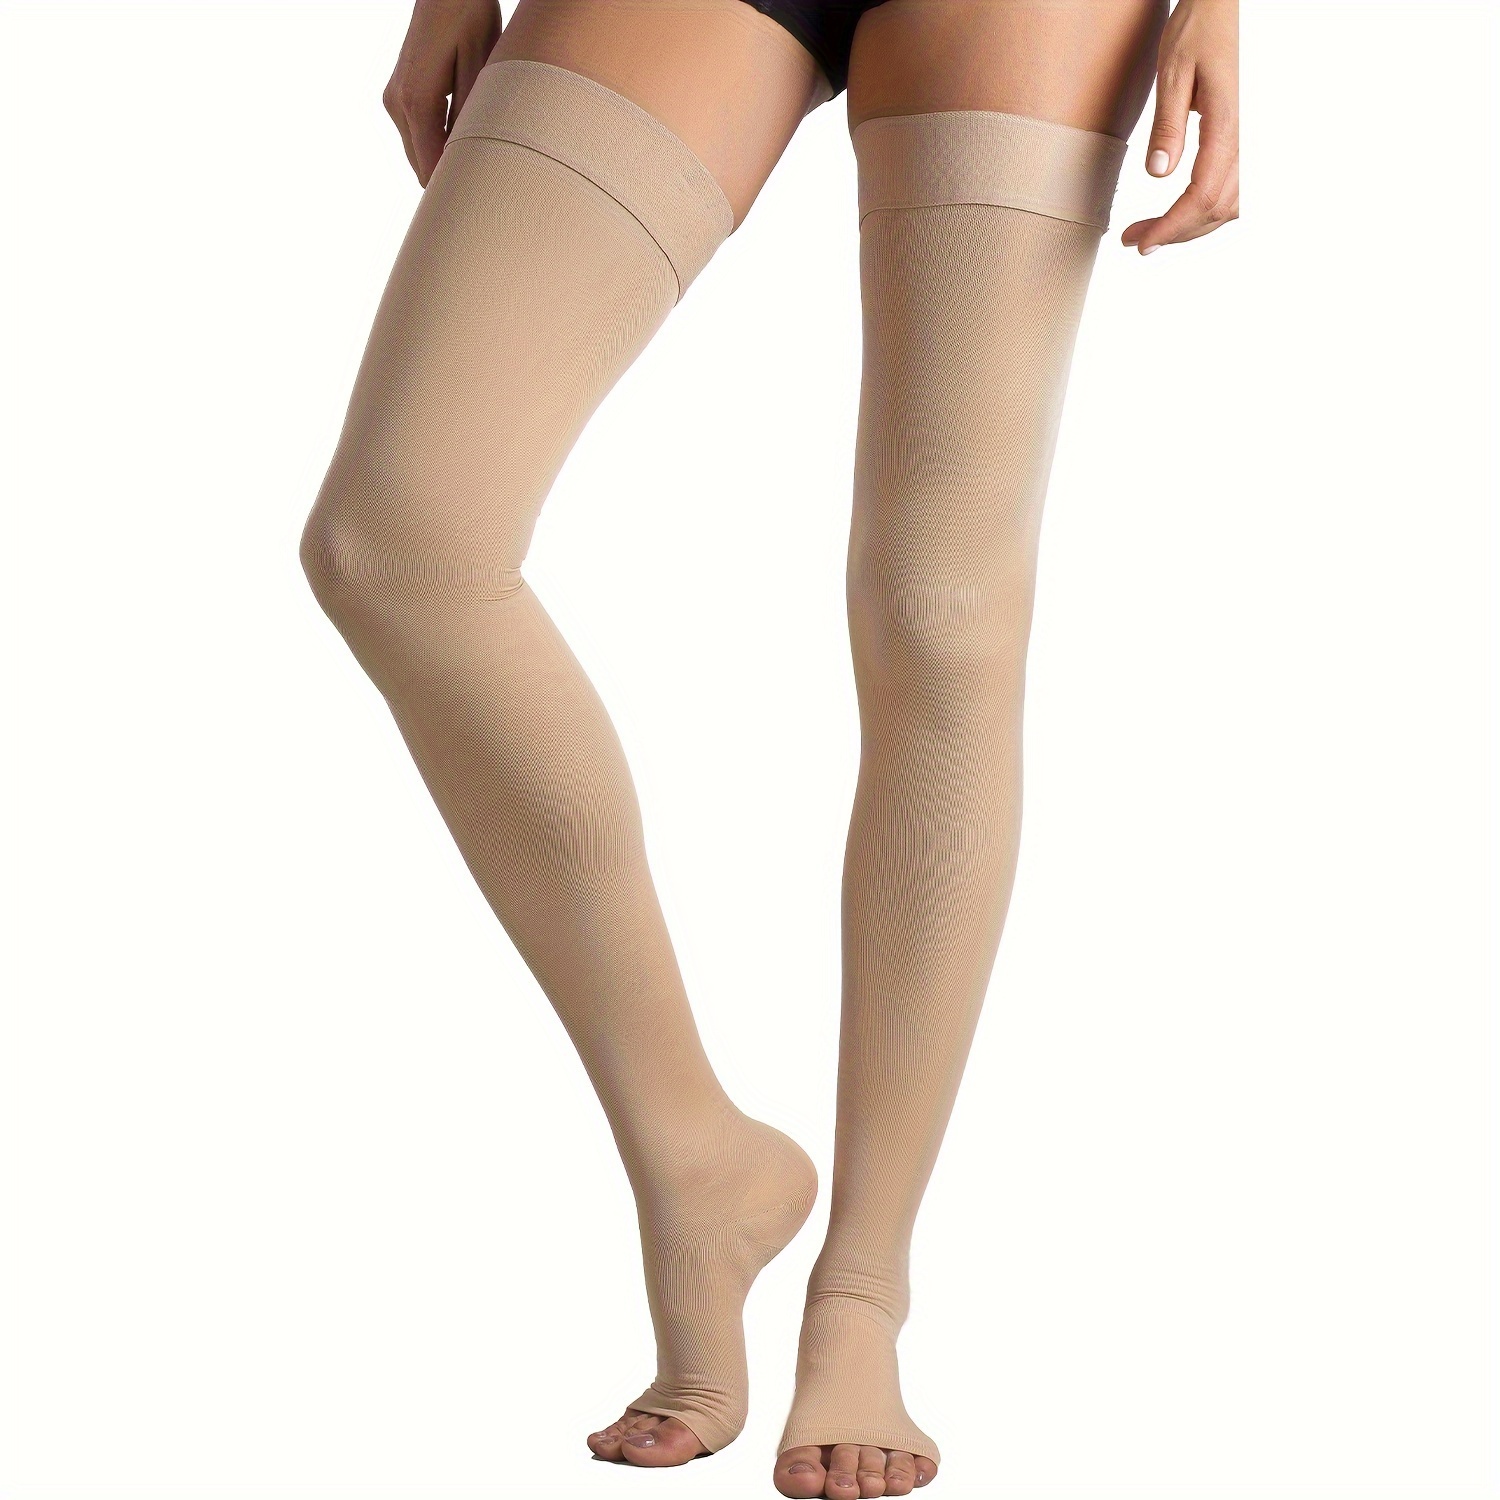 Order A Size Up, 1pair Thigh High Compression Stockings Toeless - Unisex  15-20mmHg Graduated Compression Leg Support Hose With Anti-Slip Silicone  Band